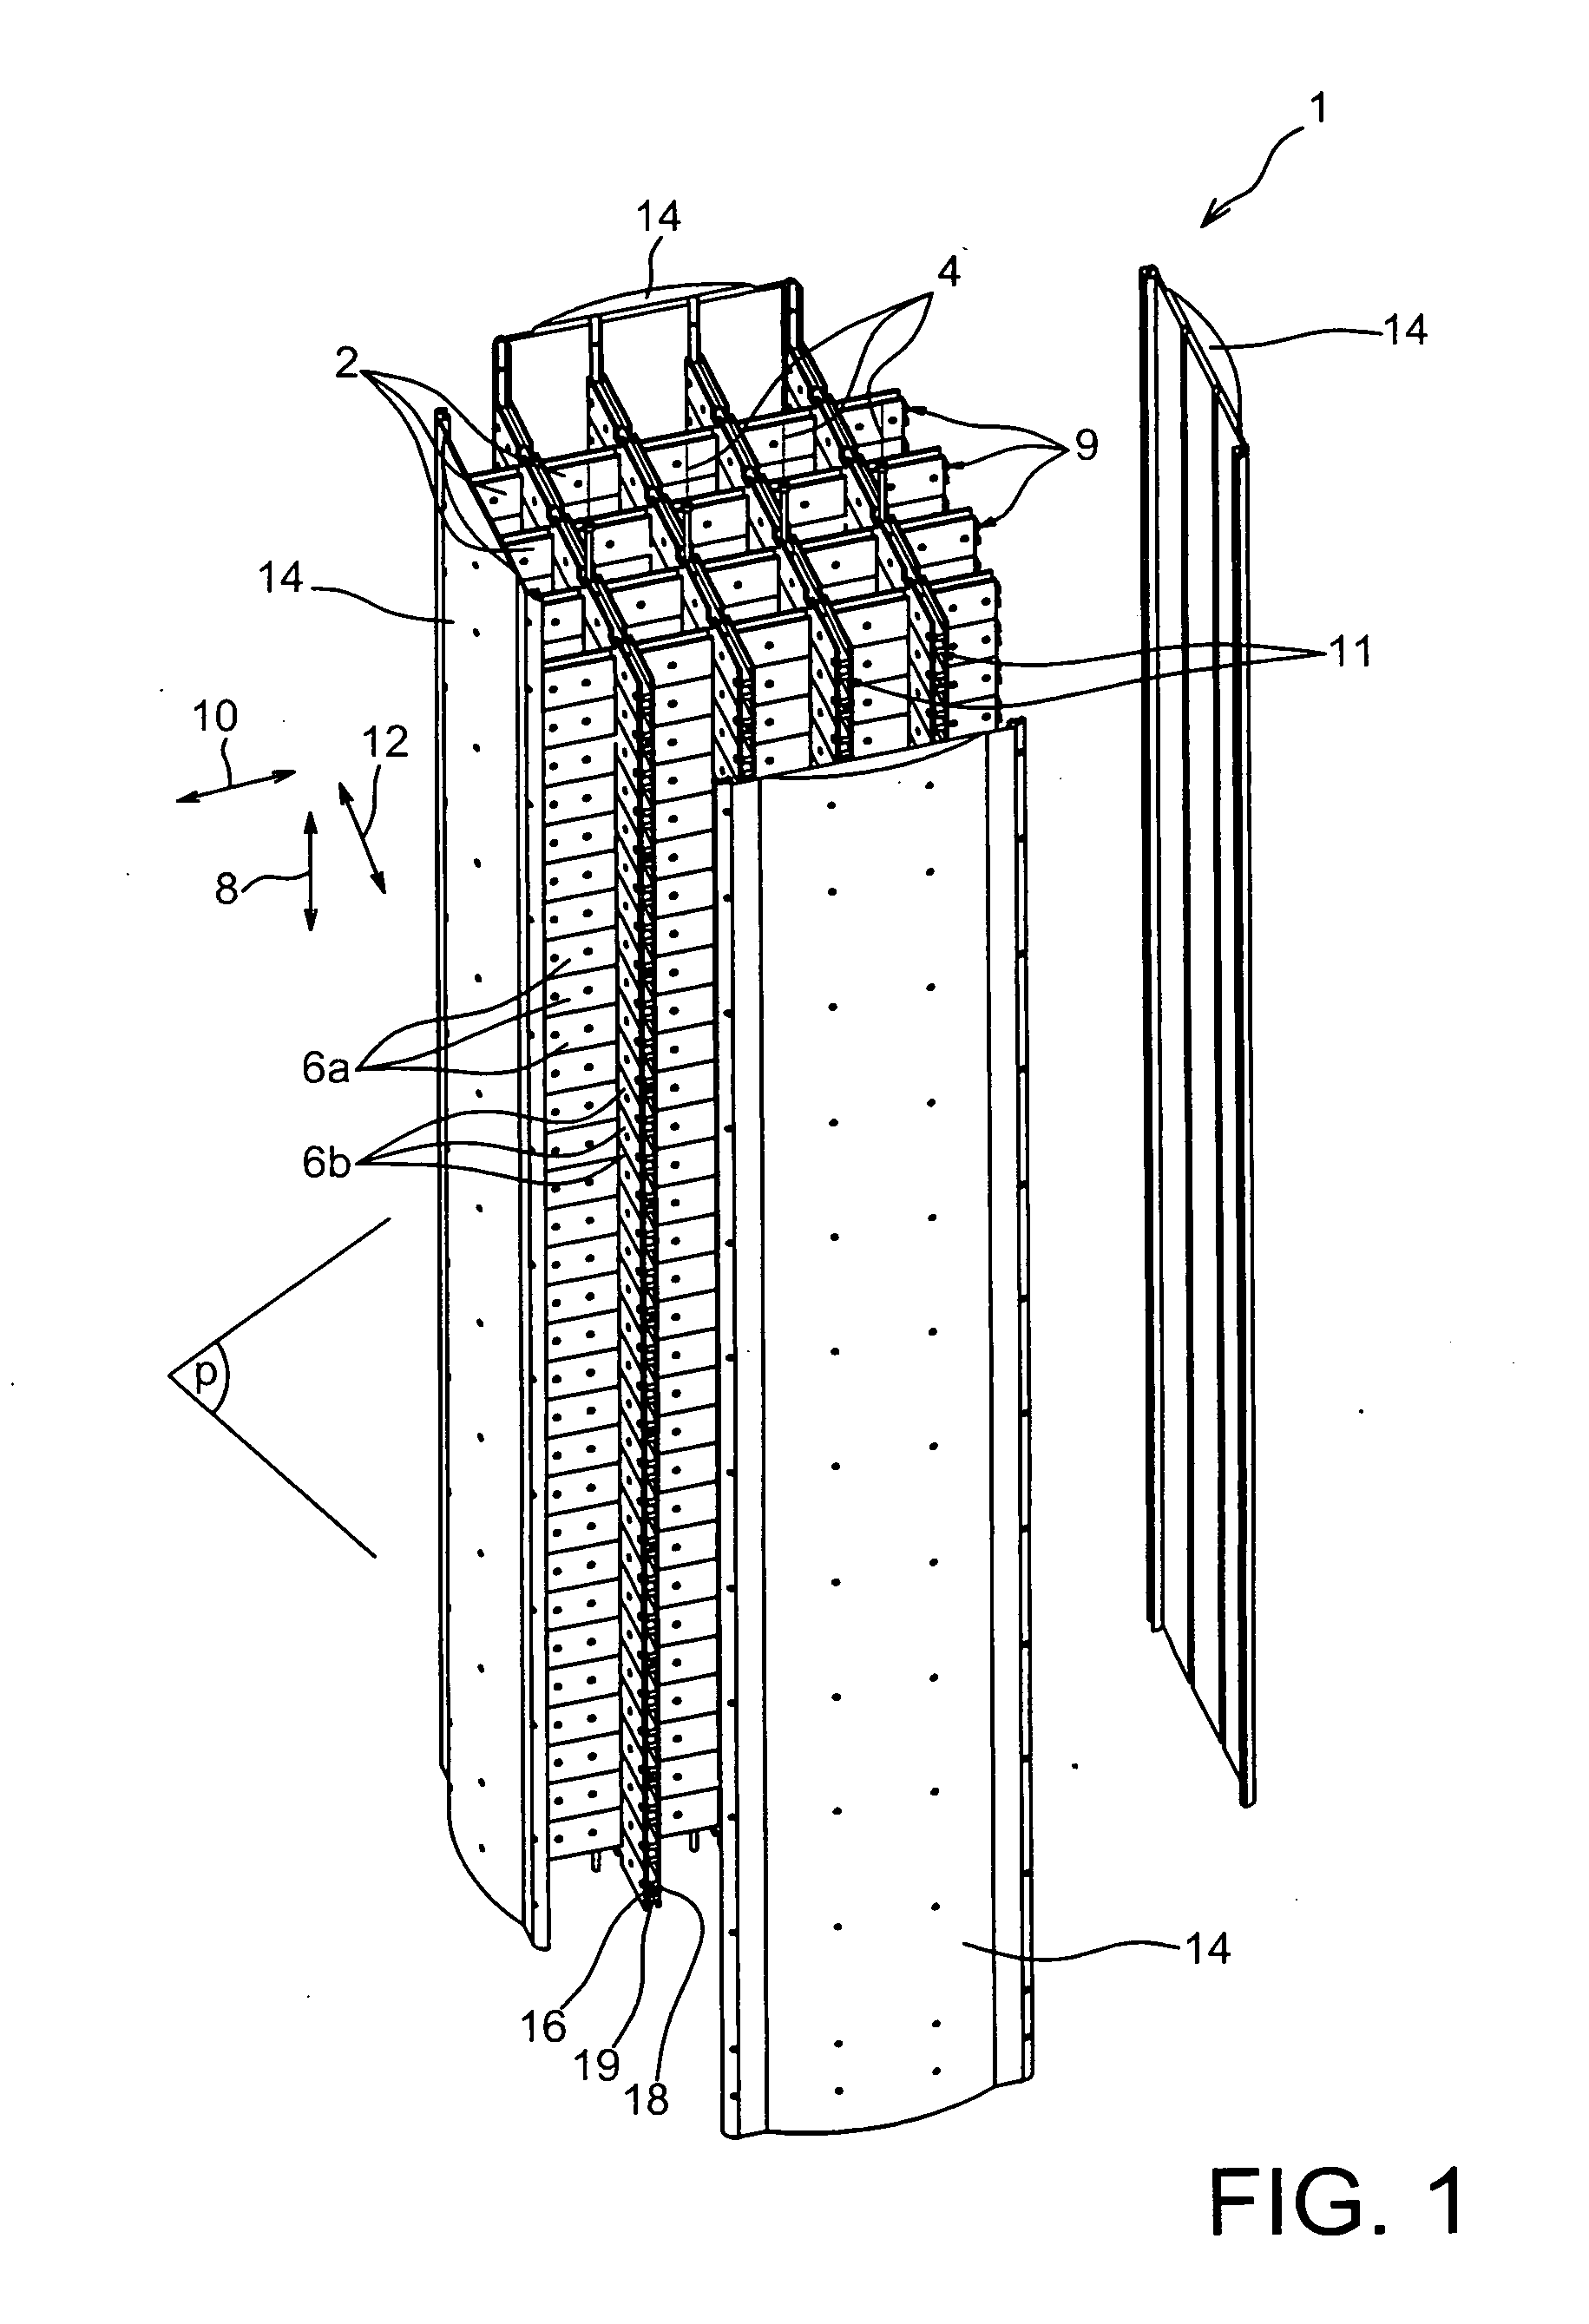 Storage Device For Storing and Transporting Nuclear Fuel Assemblies